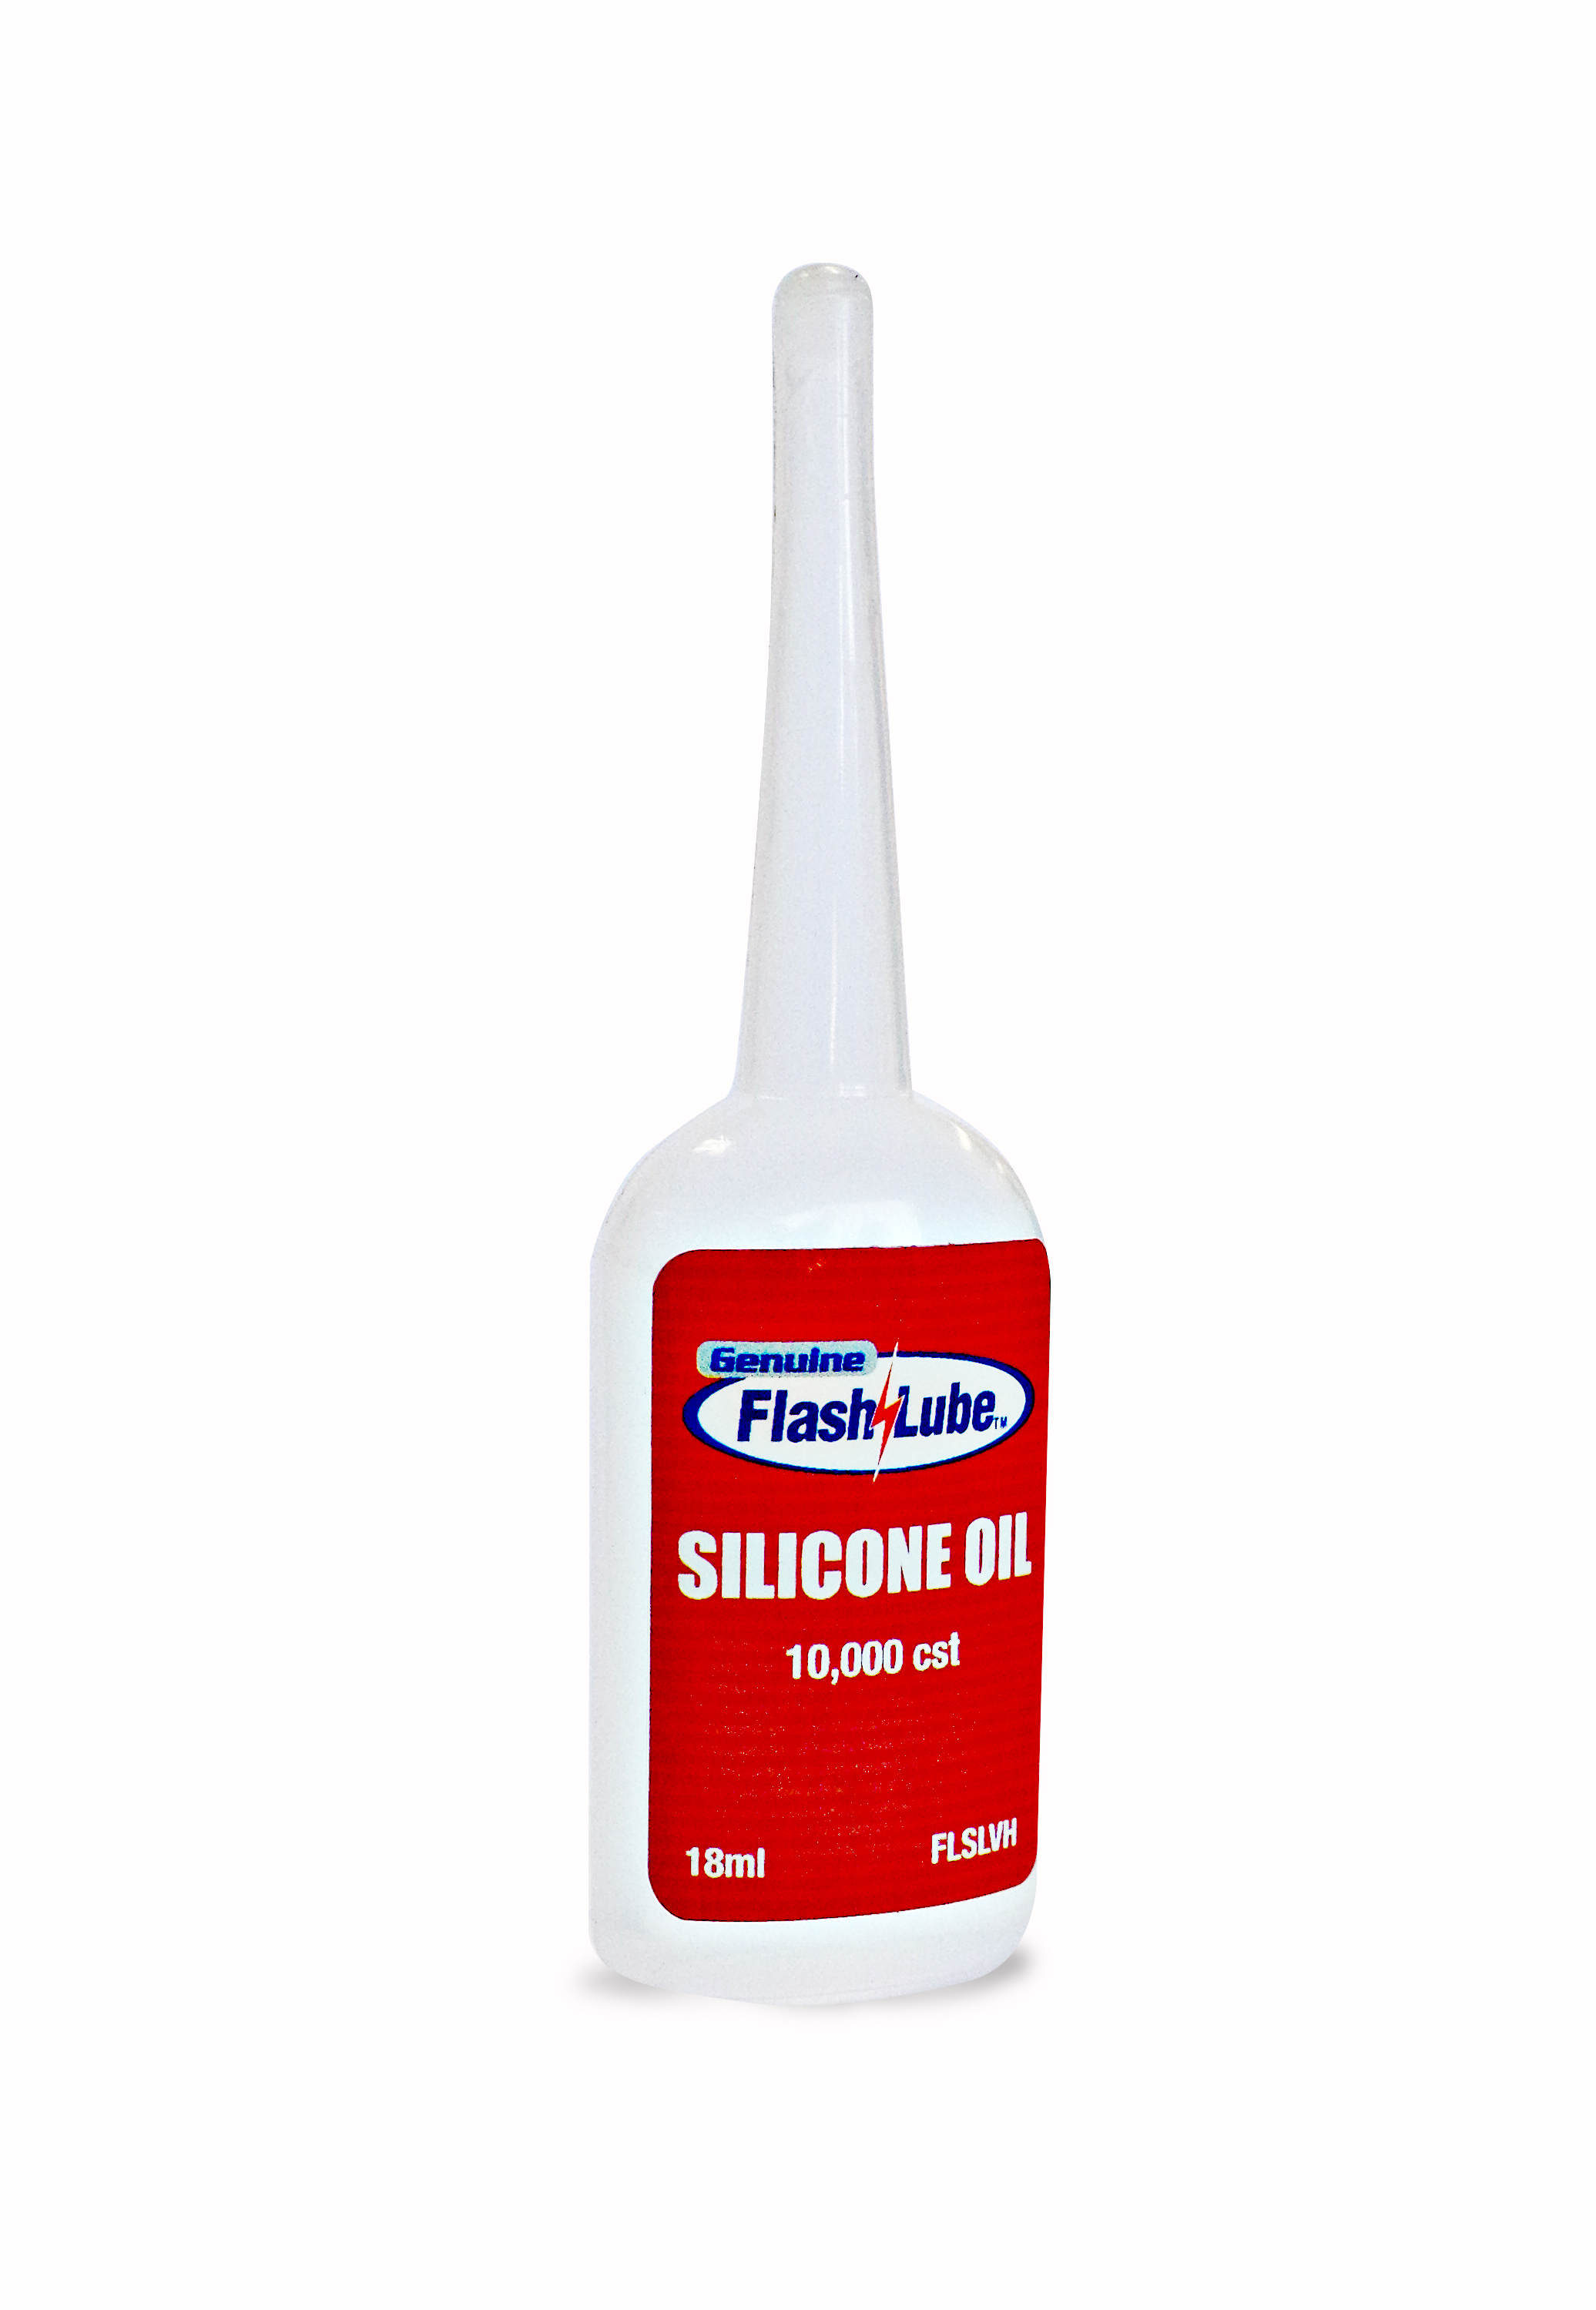 Flashlube Silicone Oil - Genuine Flashlube™ fuel additives Synthetic  lubricants for the automotive industry